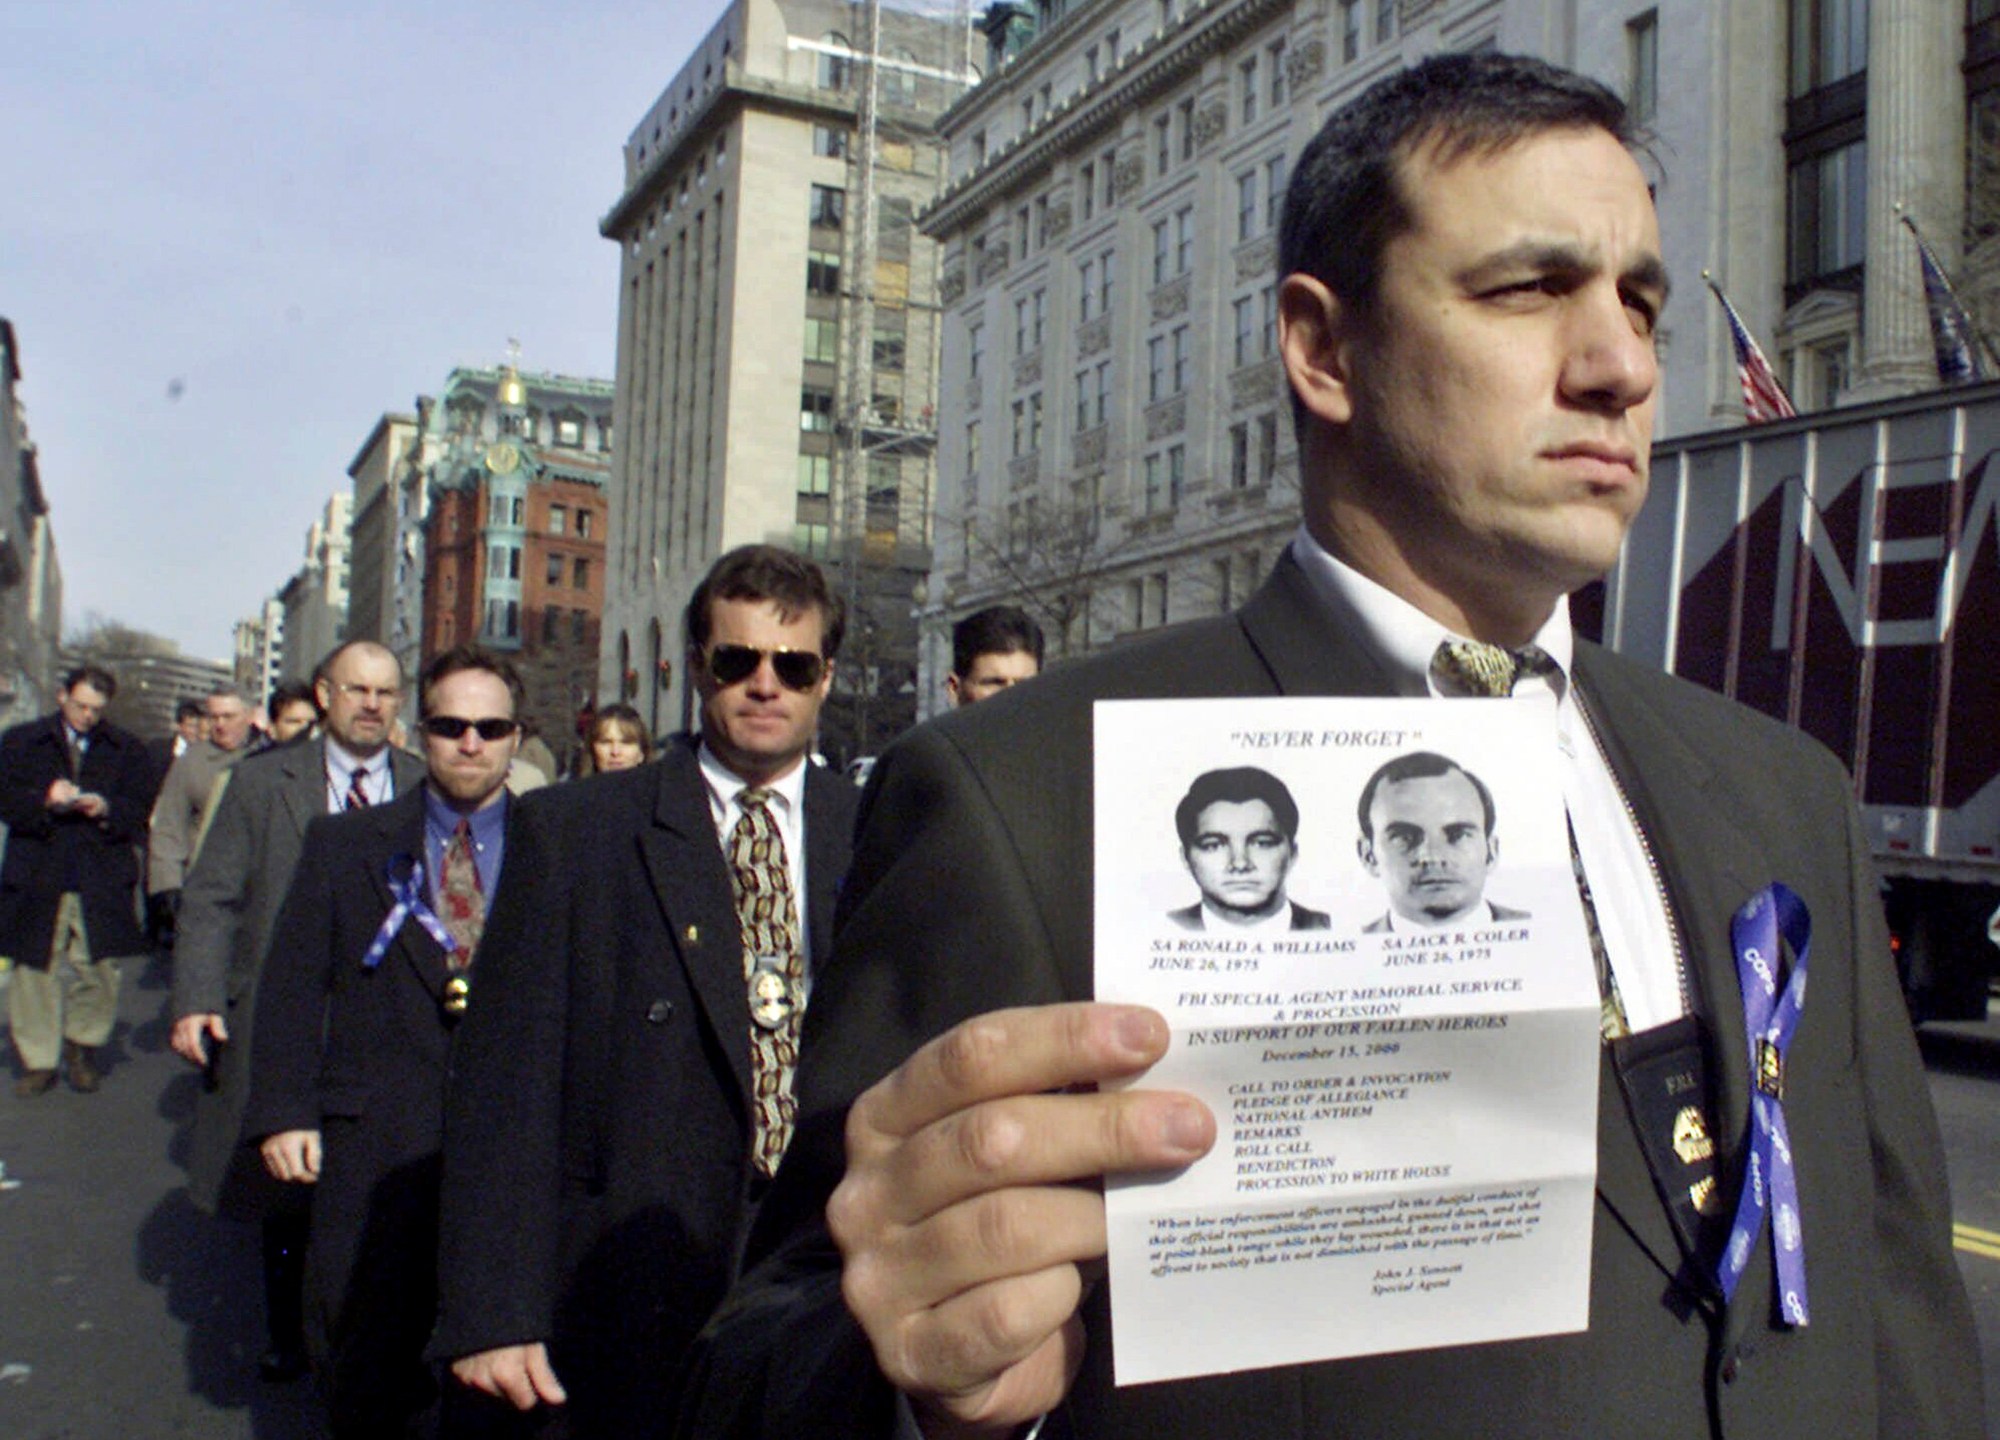 FILE - An unidentified FBI agent, one of the nearly 500 current and retired FBI agents protesting clemency for Leonard Peltier, marches toward the White House, Friday, Dec. 15, 2000, holding an image of two FBI agents, Ron Williams and Jack Coler, who were killed on the Pine Ridge Indian reservation in South Dakota in 1975. Peltier, who has spent most of his life in prison for the killings, has a parole hearing Monday, June 10, 2024, at a federal prison in Florida. (AP Photo/Hillery Smith Garrison, File)